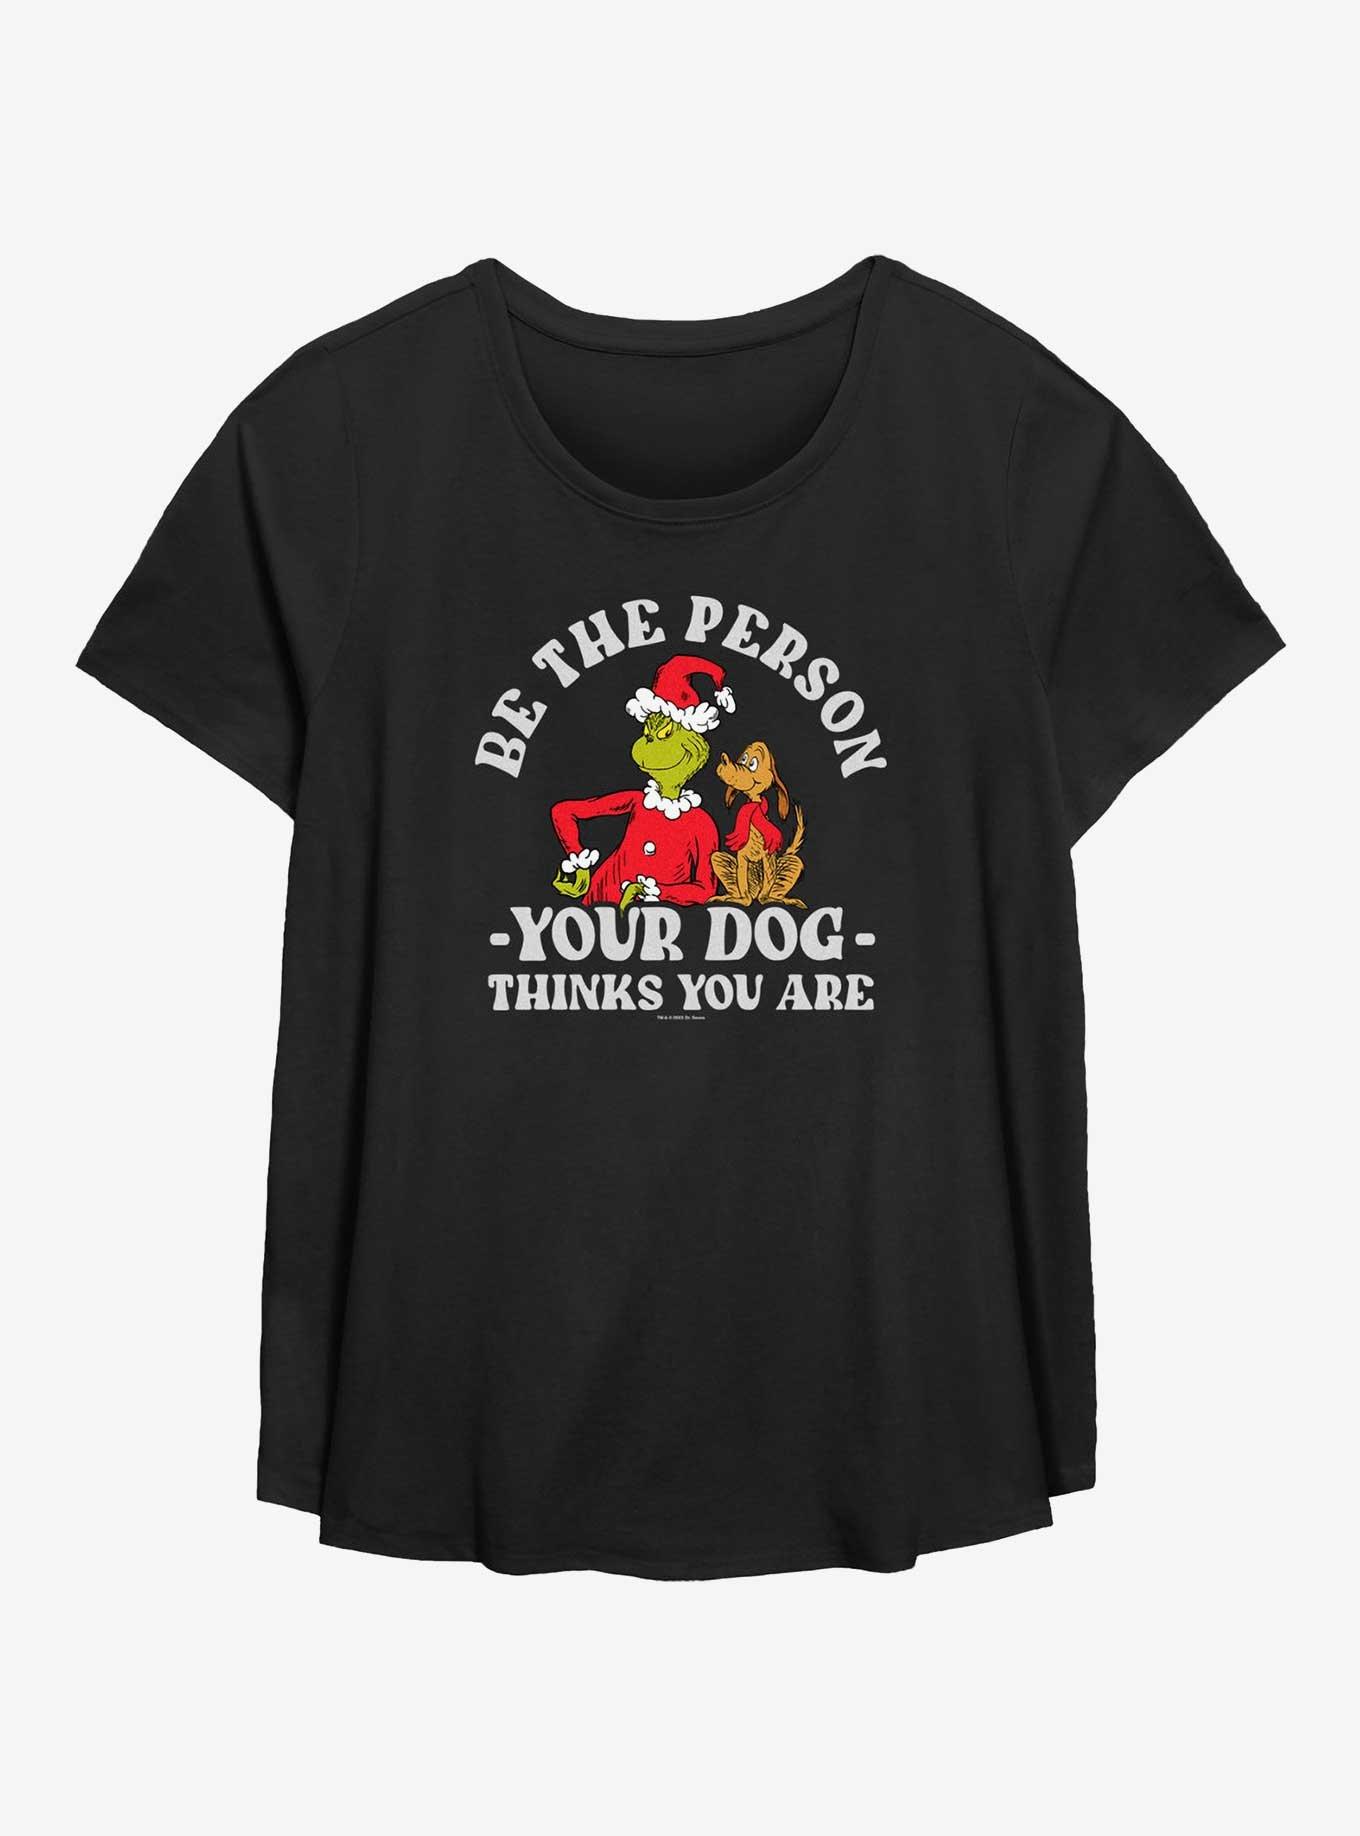 Dr. Seuss How The Grinch Stole Christmas Your Dog Thinks You Are Girls T-Shirt Plus